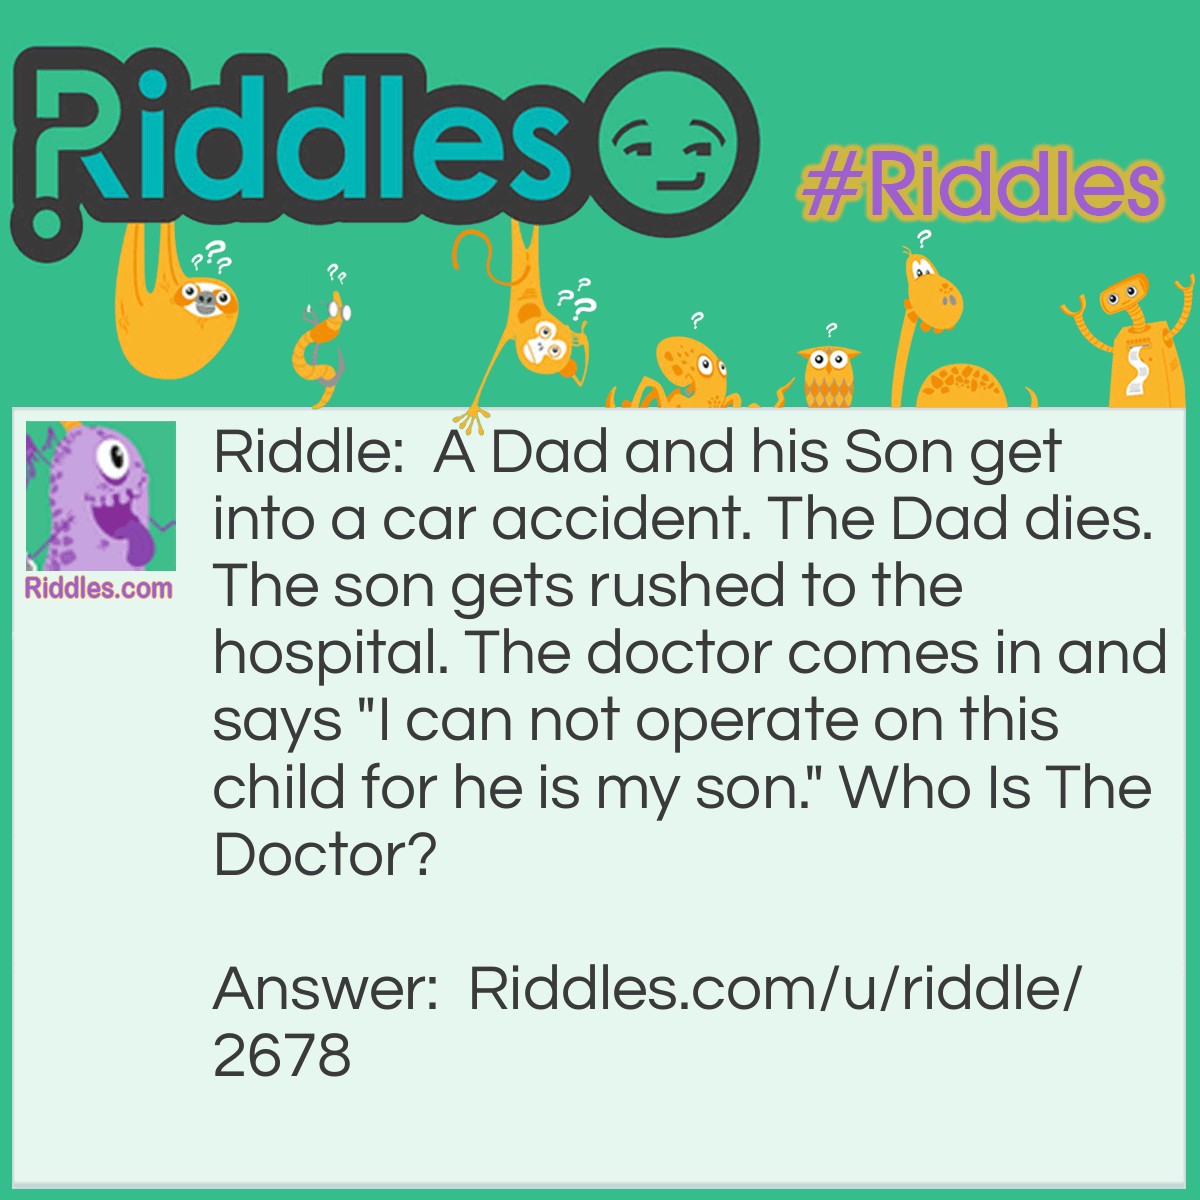 Riddle: A Dad and his Son get into a car accident. The Dad dies. The son gets rushed to the hospital. The doctor comes in and says "I can not operate on this child for he is my son." Who Is The Doctor? Answer: His Mom.